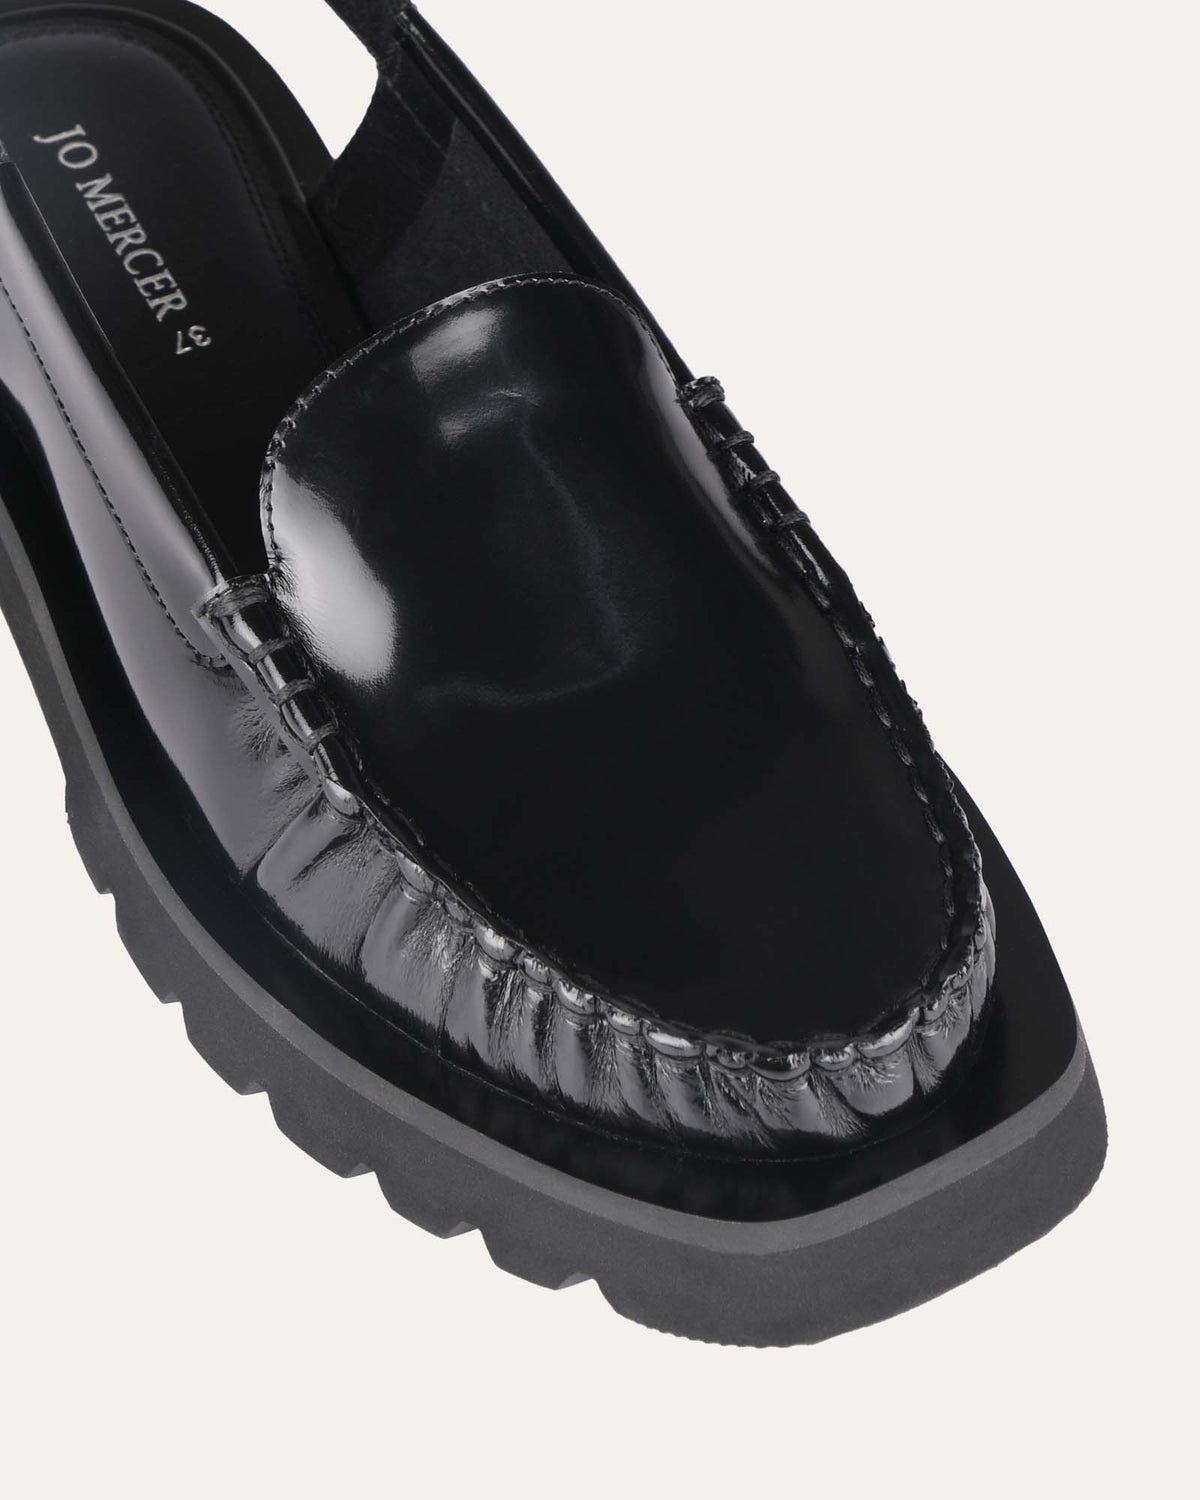 EMERSON LOAFERS BLACK BOX LEATHER